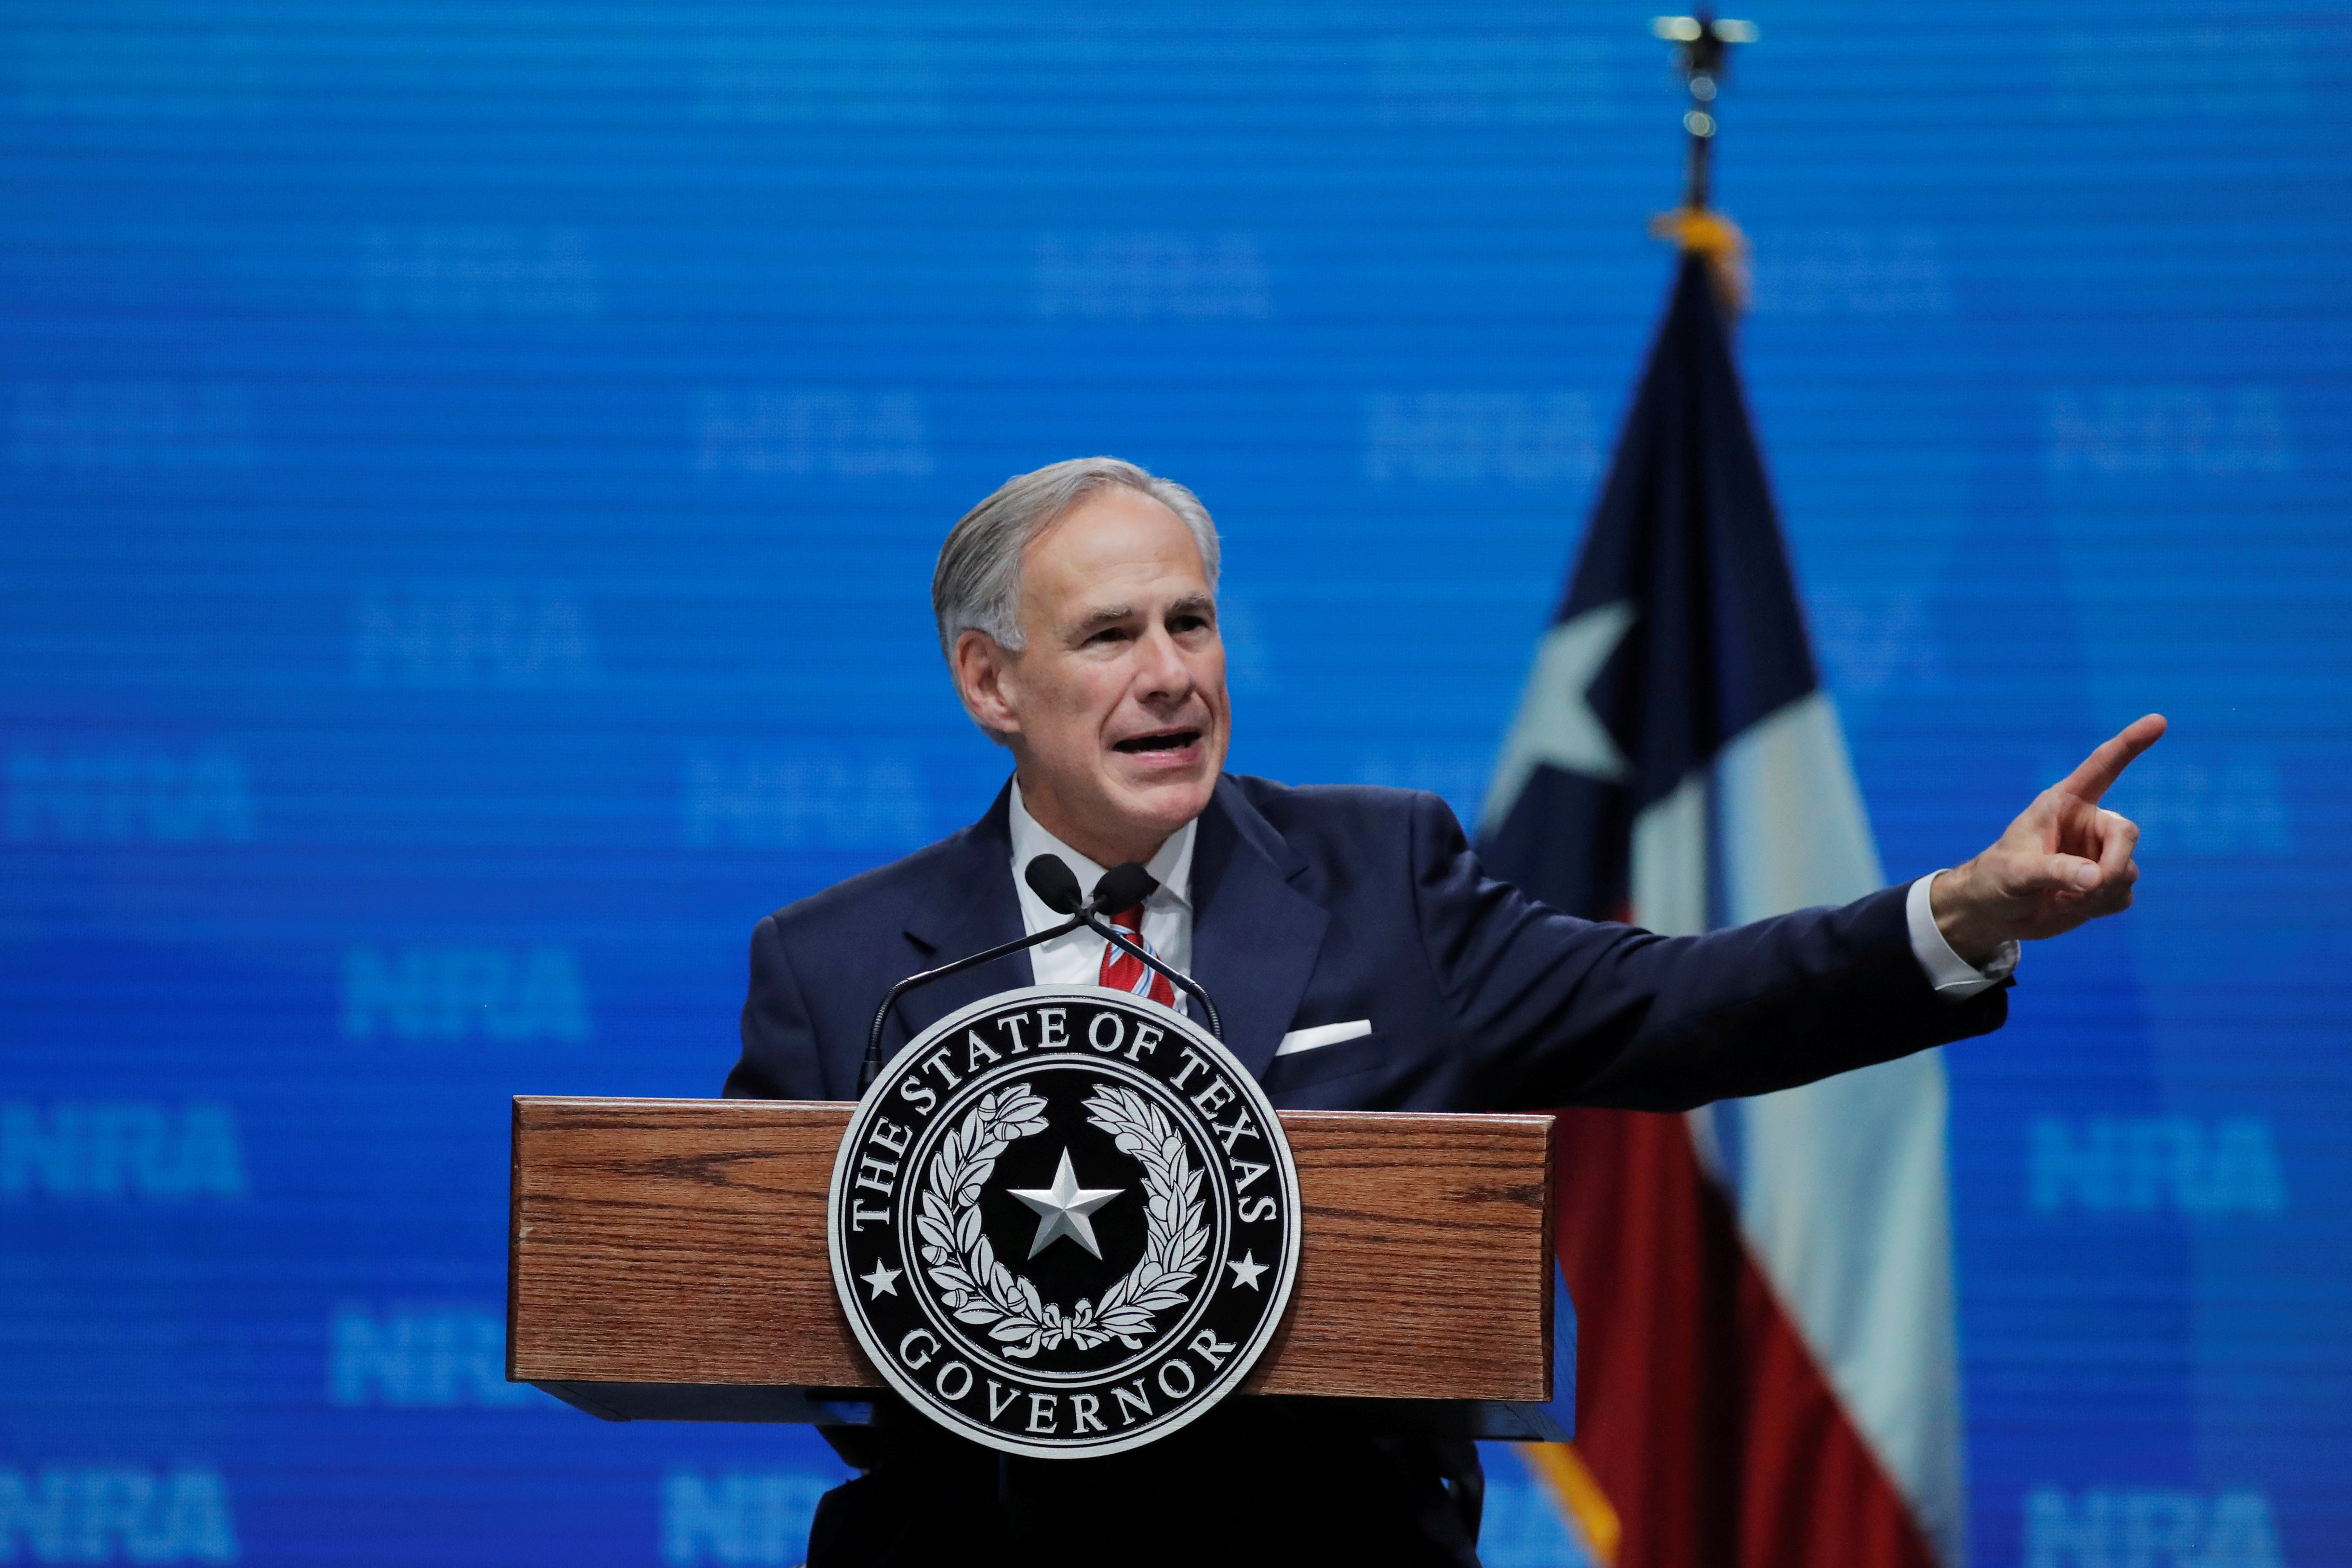 Texas Governor Greg Abbott is the latest Republican politician to attempt to ban critical race theory